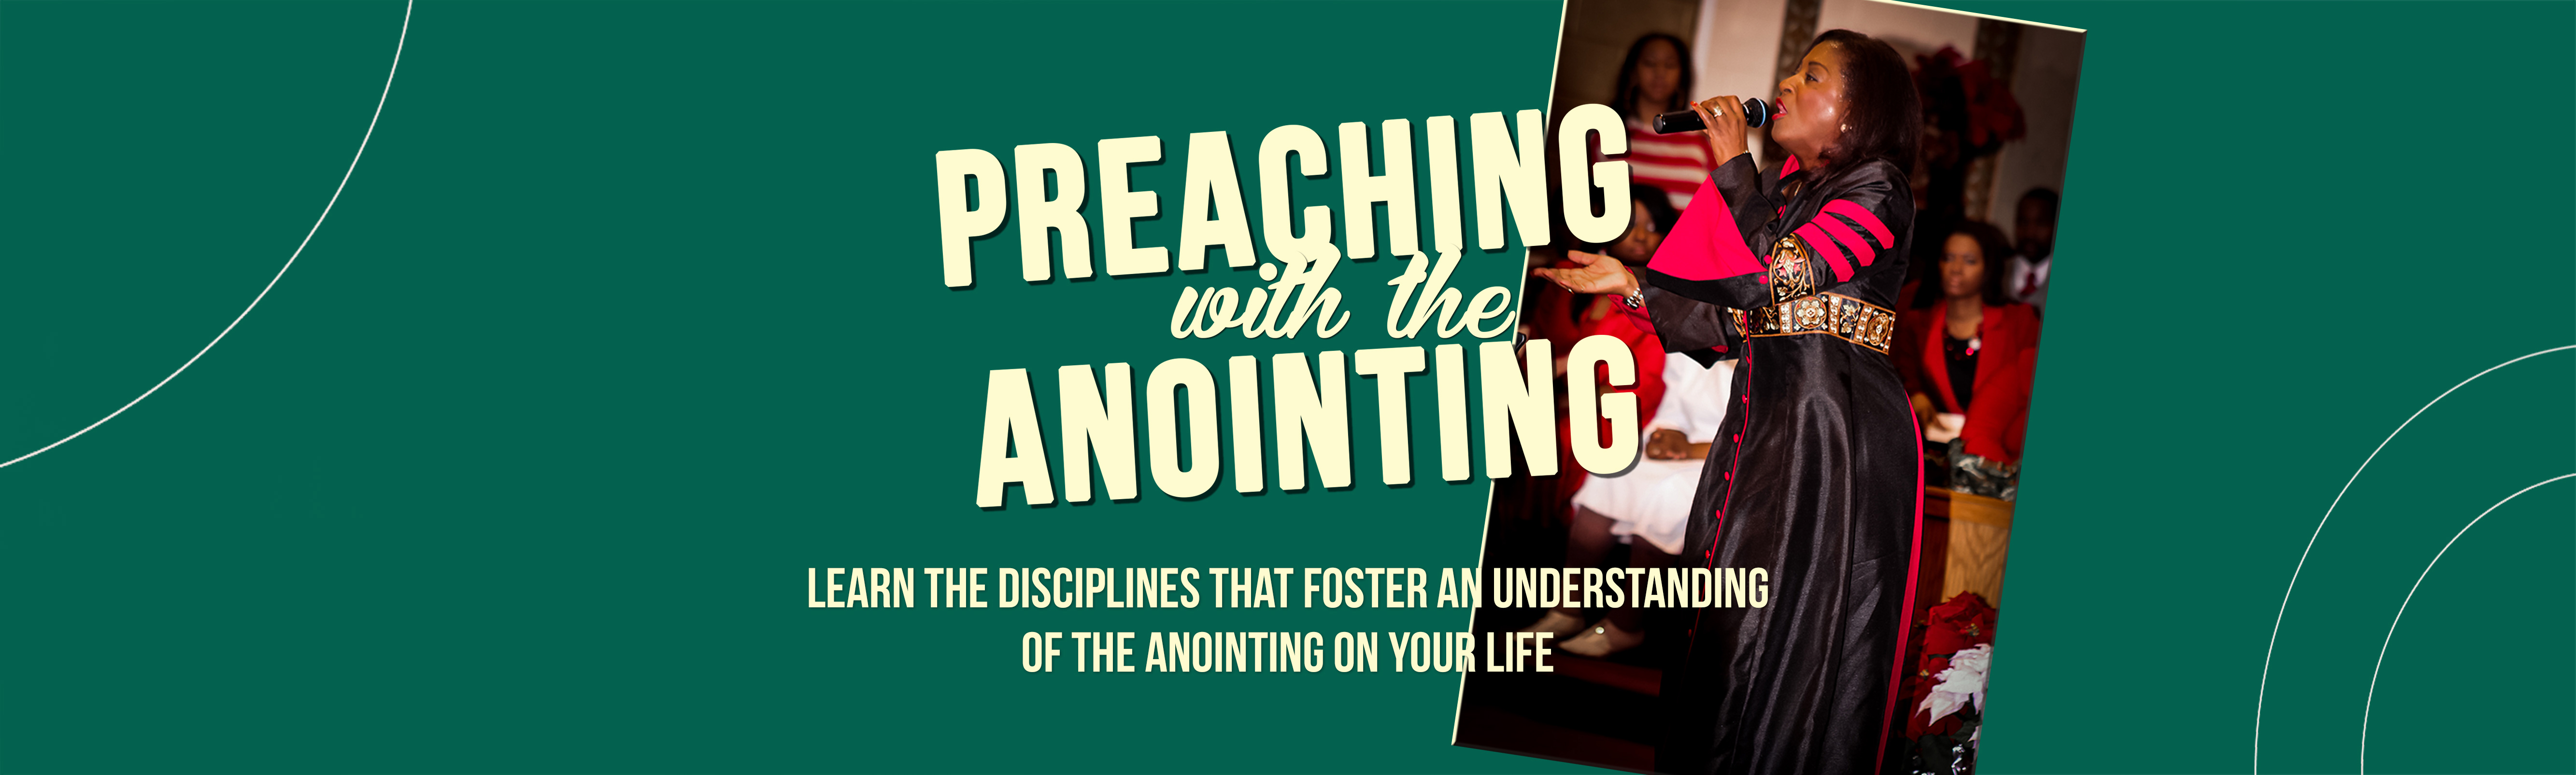 Preaching With The Anointing